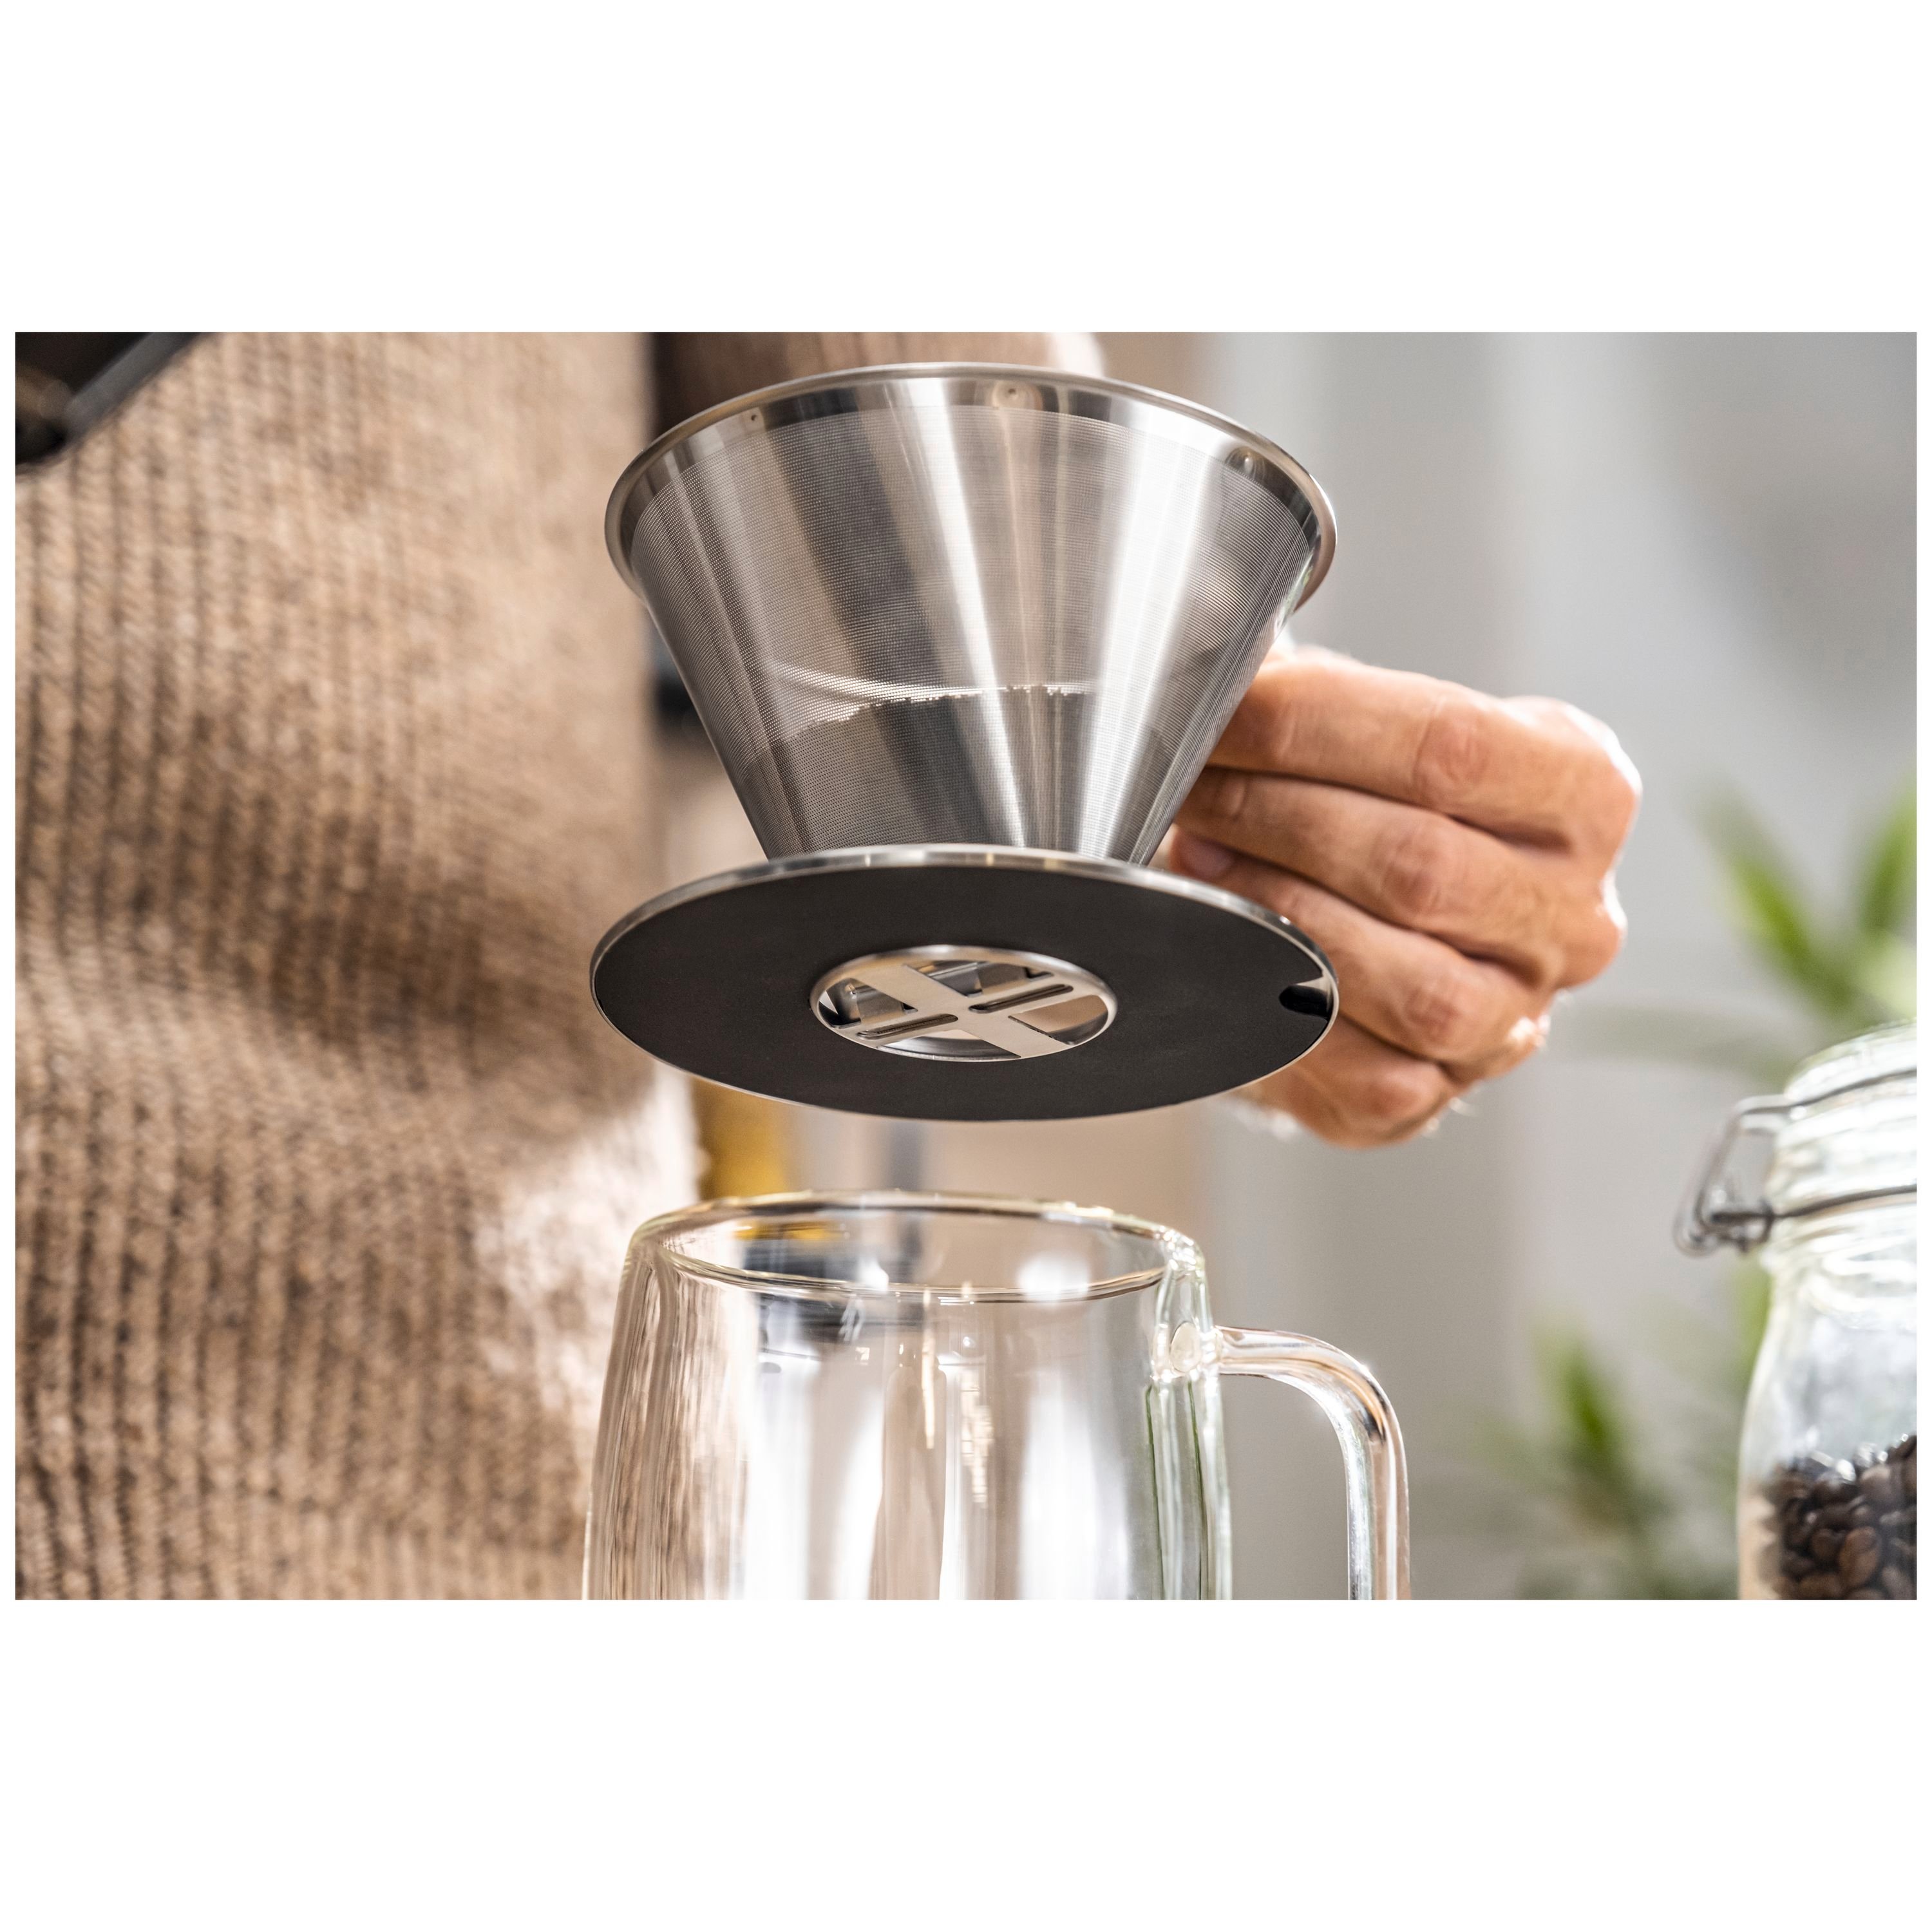 ZWILLING J.A. Henckels ZWILLING Sorrento Stainless Steel Pour Over